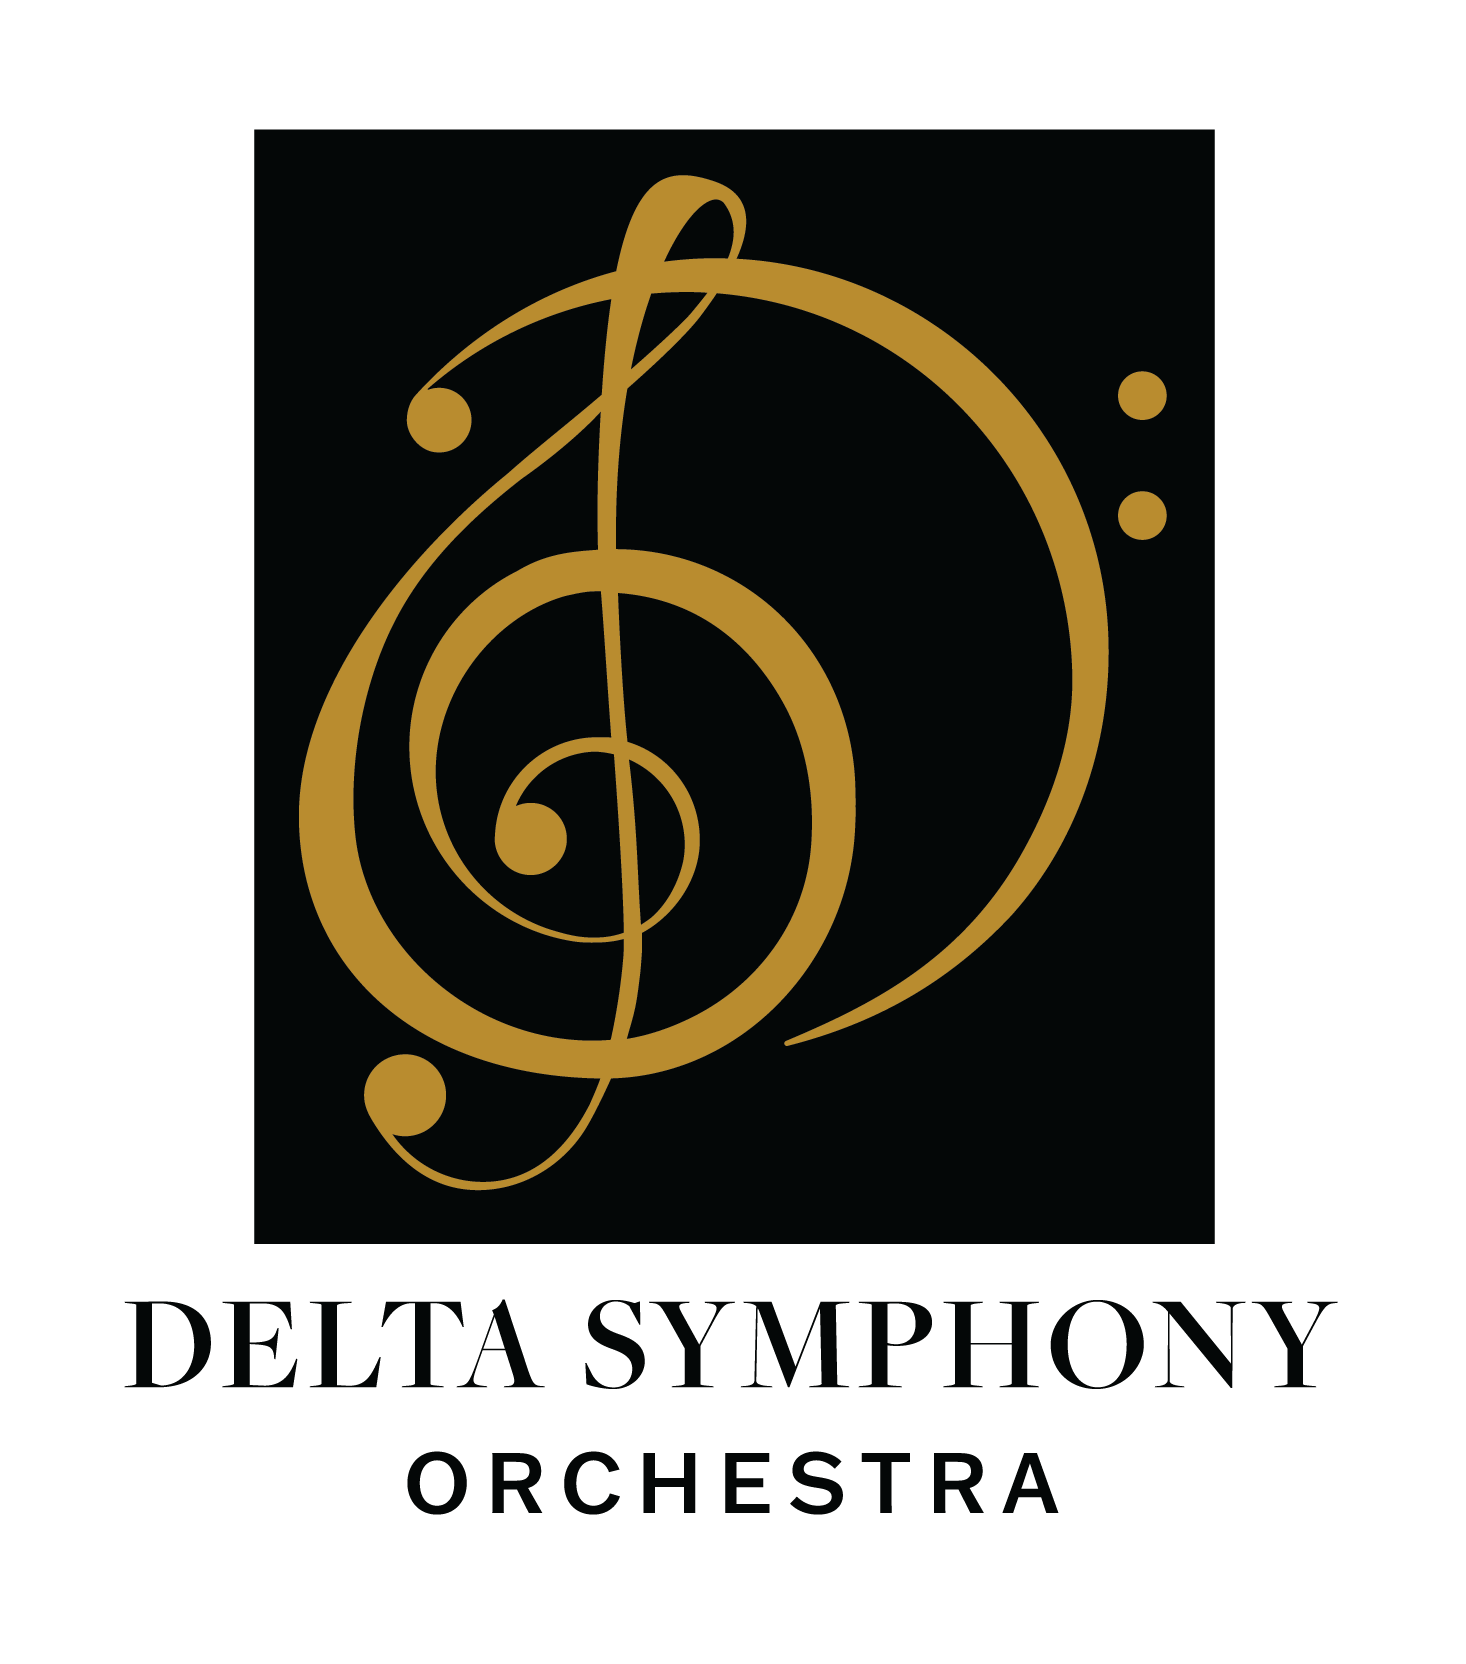 Delta Symphony Orchestra full color logo showing black rectangle with combined treble and bass clef symbols to create DS for Delta Symphony in gold, black text underneath saying Delta Symphony Orchestra